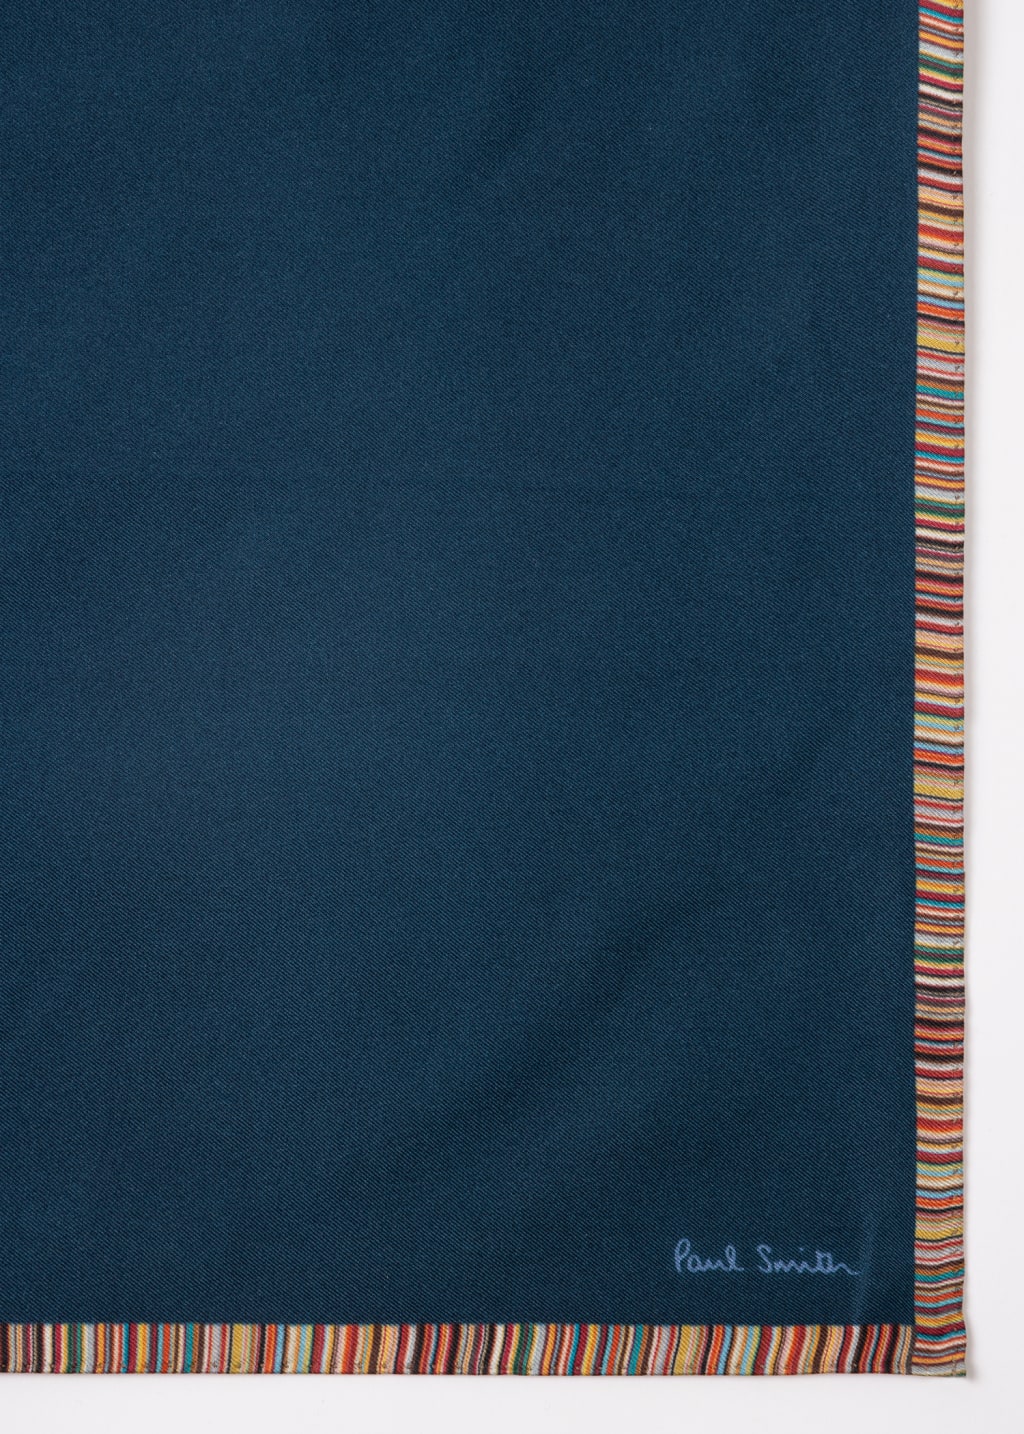 Product View - Men's Navy Signature Stripe Silk Pocket Square by Paul Smith